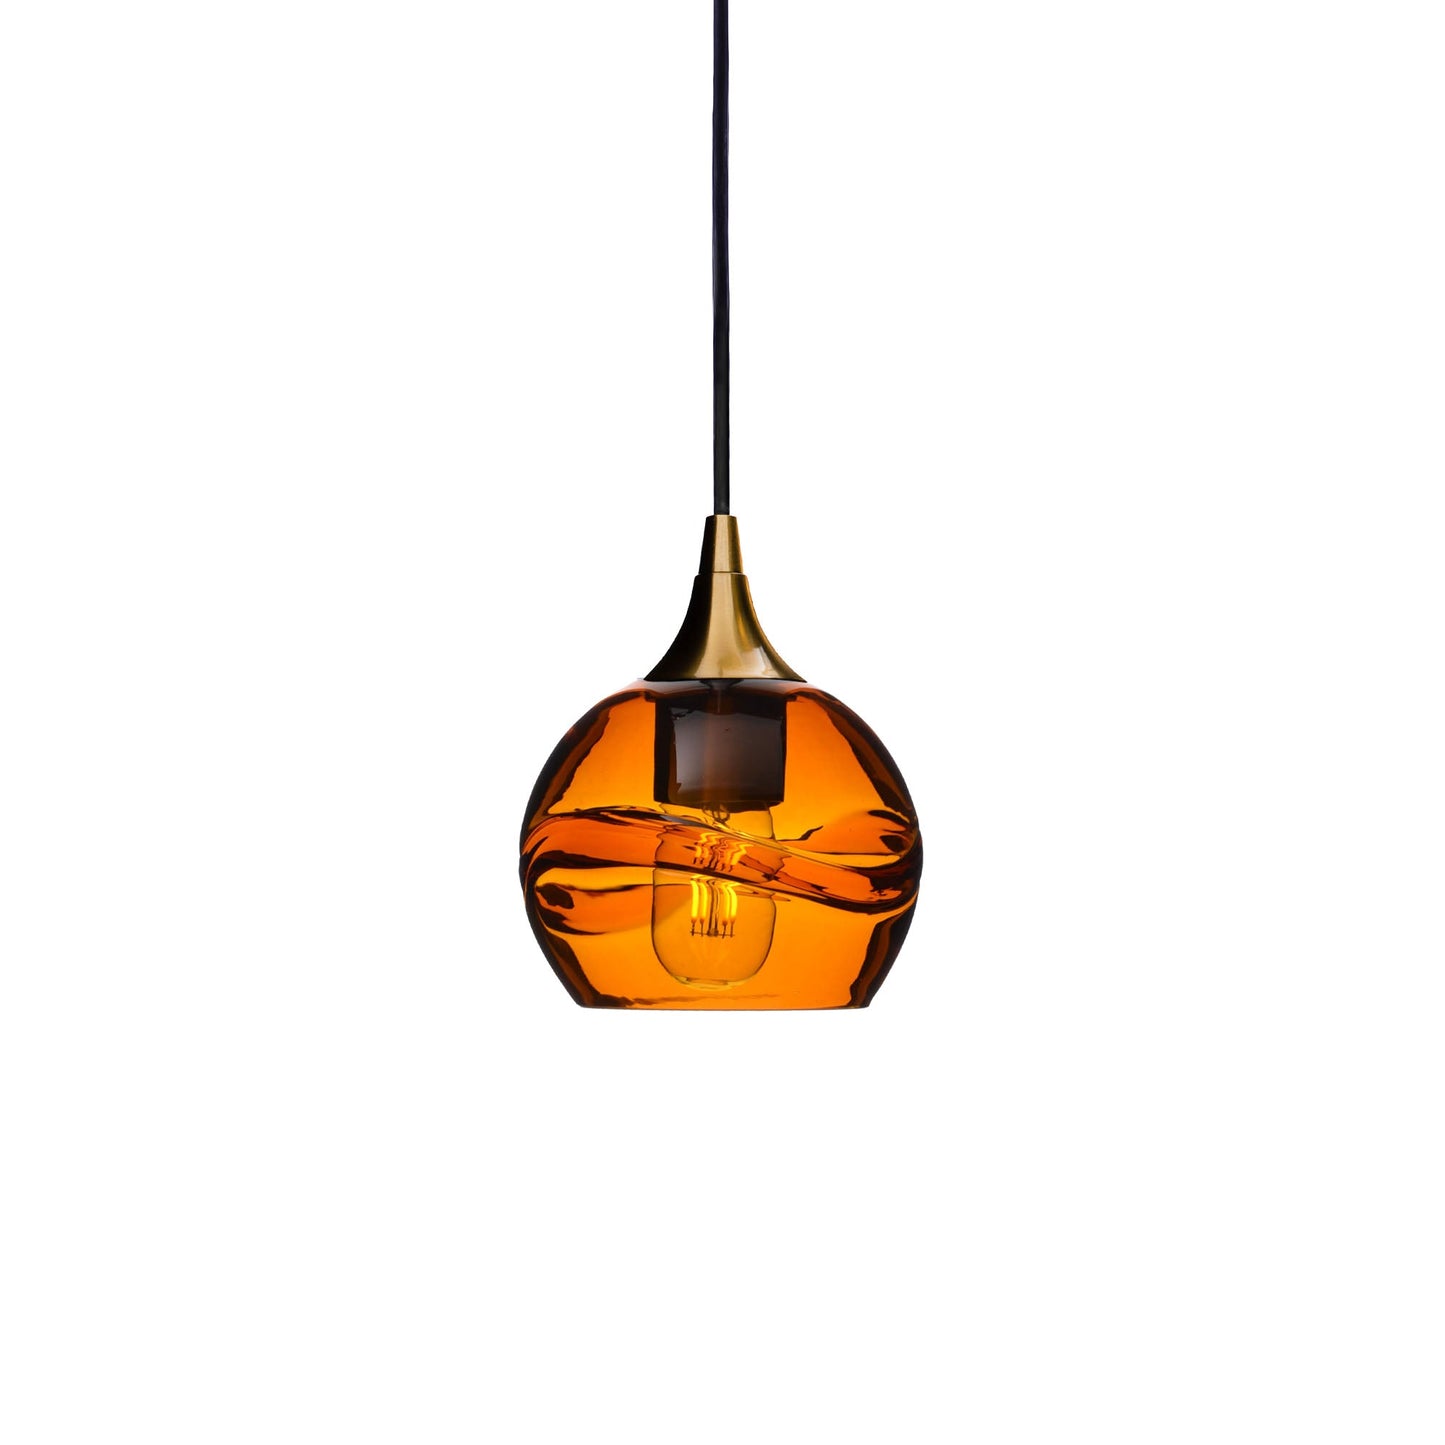 763 Swell: Single Pendant Light-Glass-Bicycle Glass Co - Hotshop-Harvest Gold-Polished Brass-Bicycle Glass Co